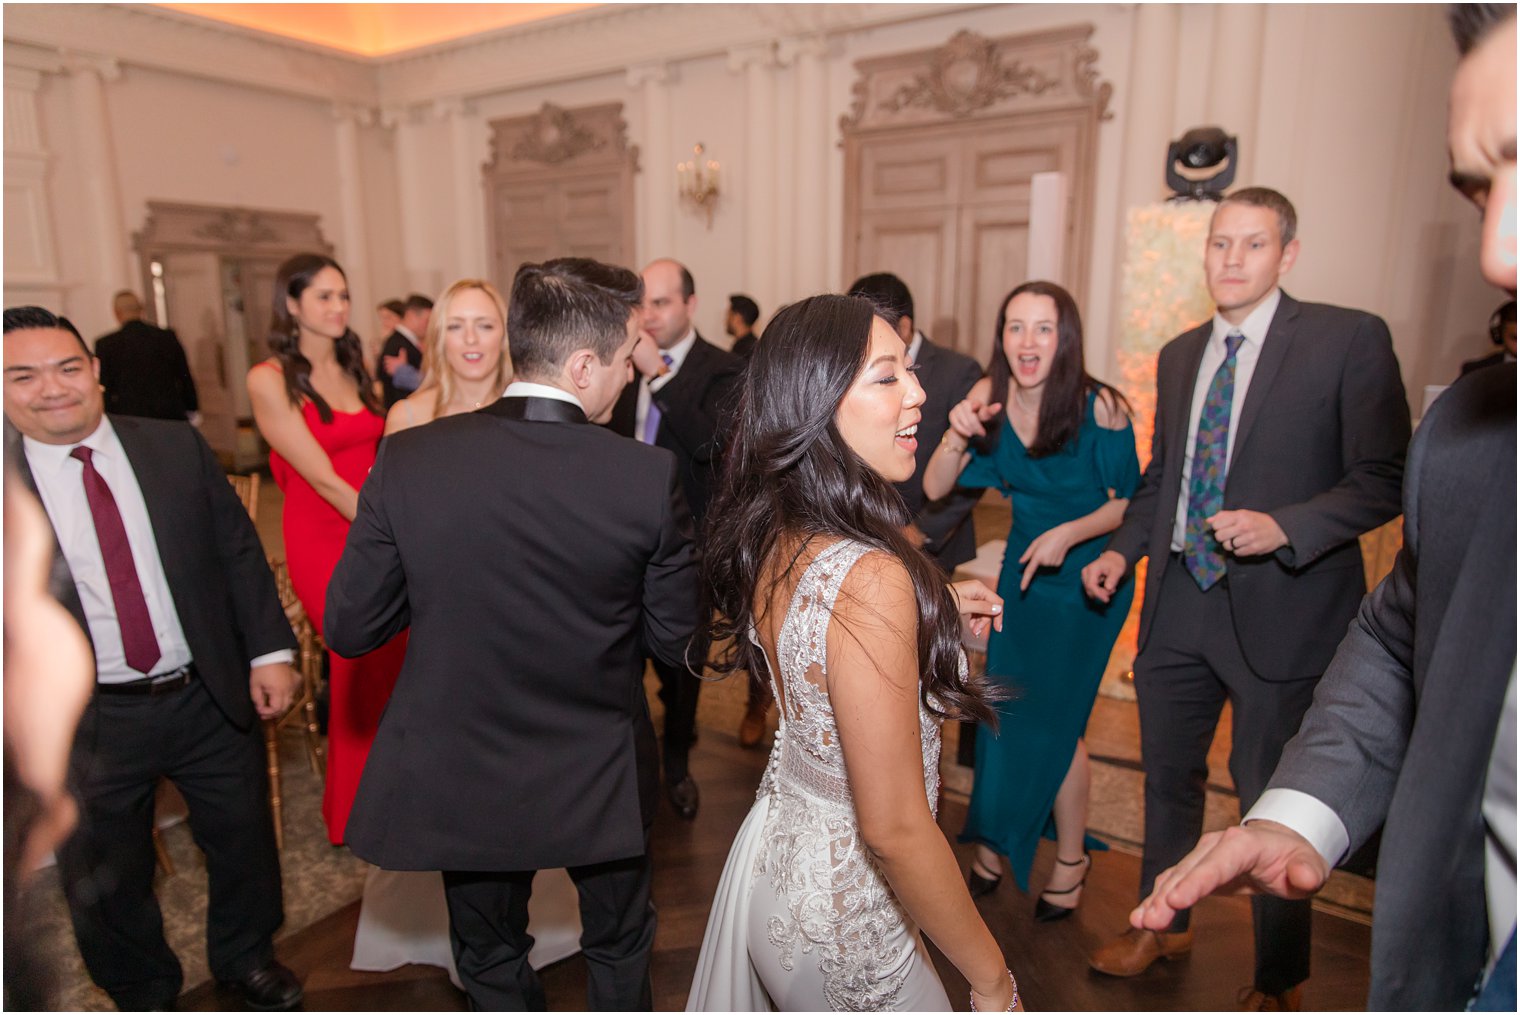 Bride and groom dancing during reception at Park Chateau Estate